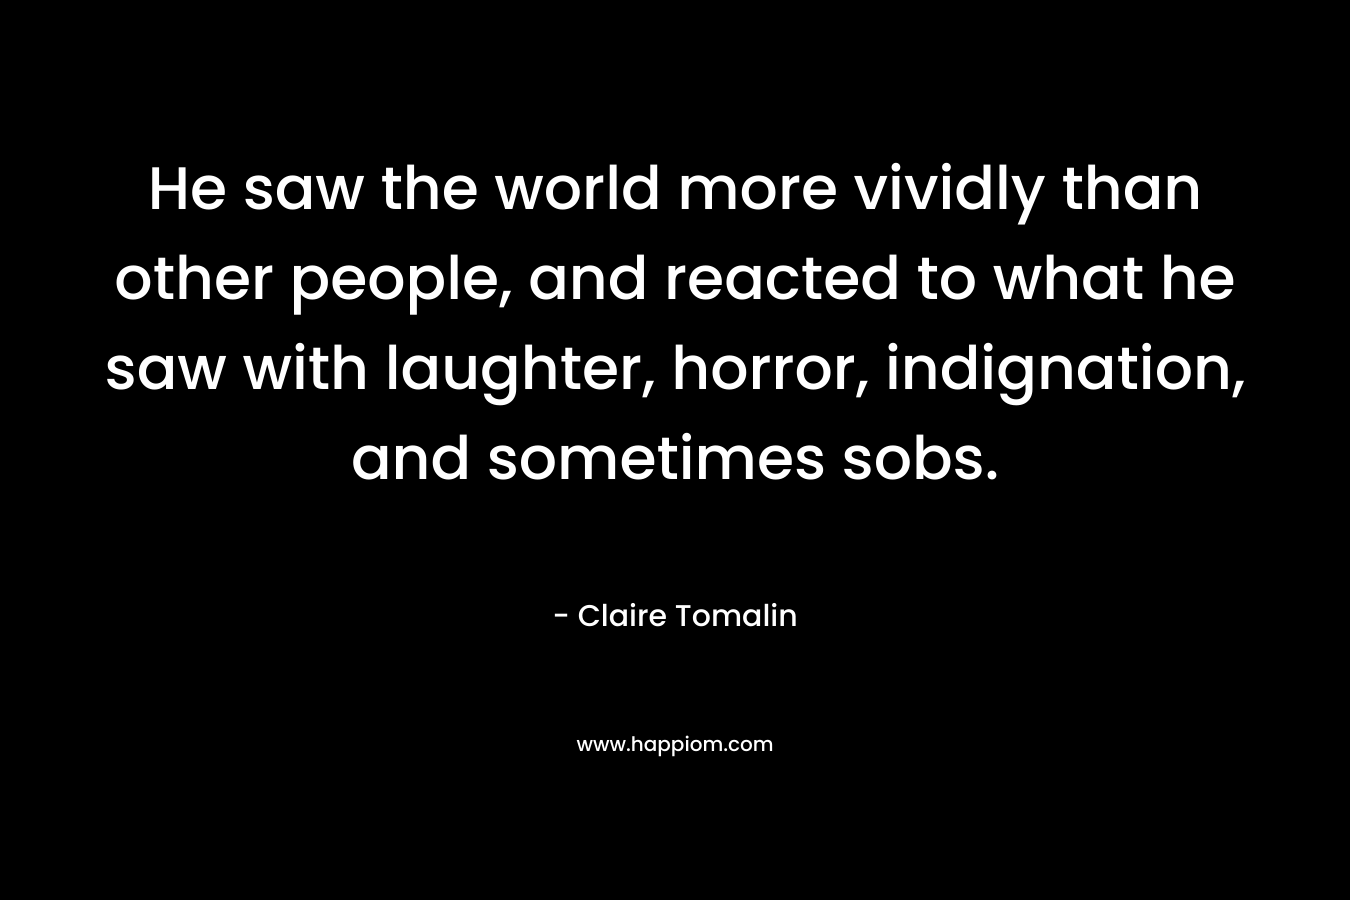 He saw the world more vividly than other people, and reacted to what he saw with laughter, horror, indignation, and sometimes sobs. – Claire Tomalin